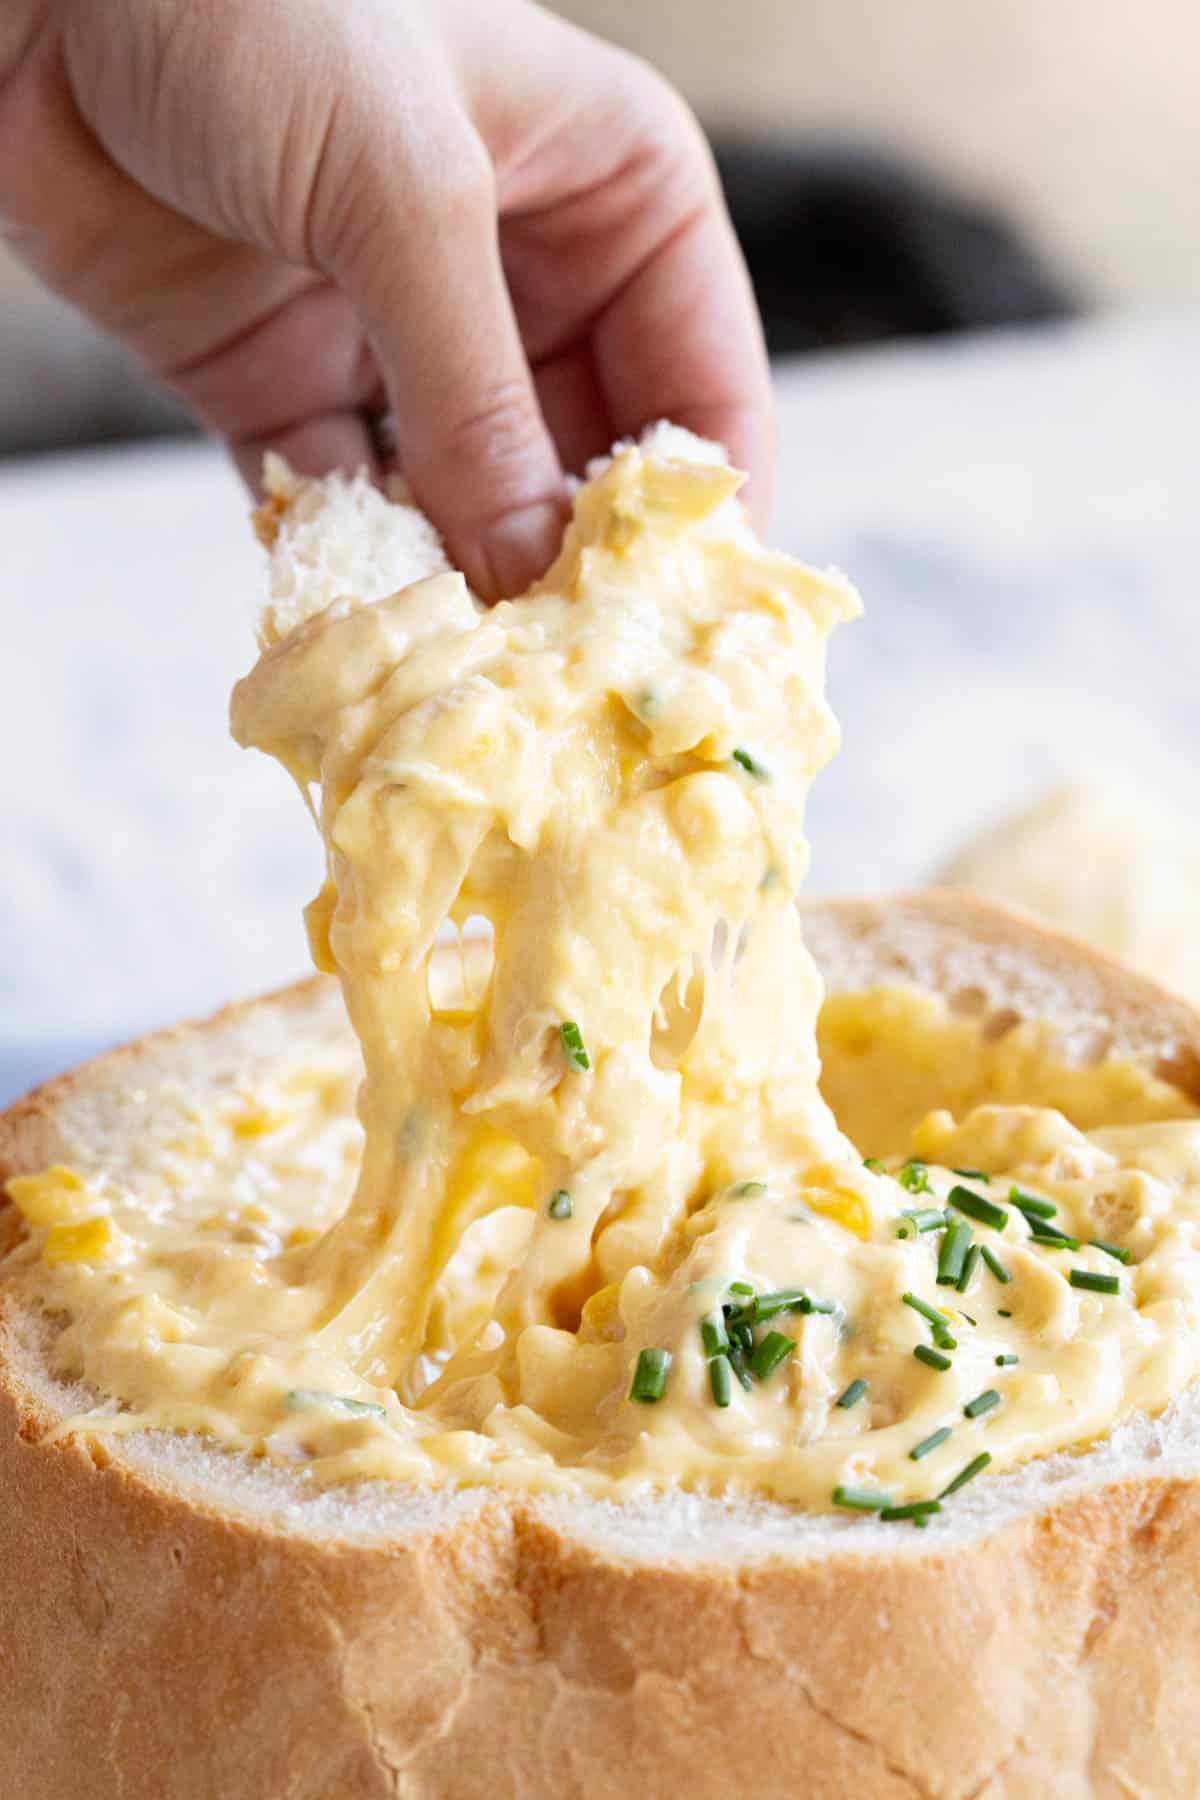 A hand lifts a piece of bread loaded with creamy chicken and corn dip.